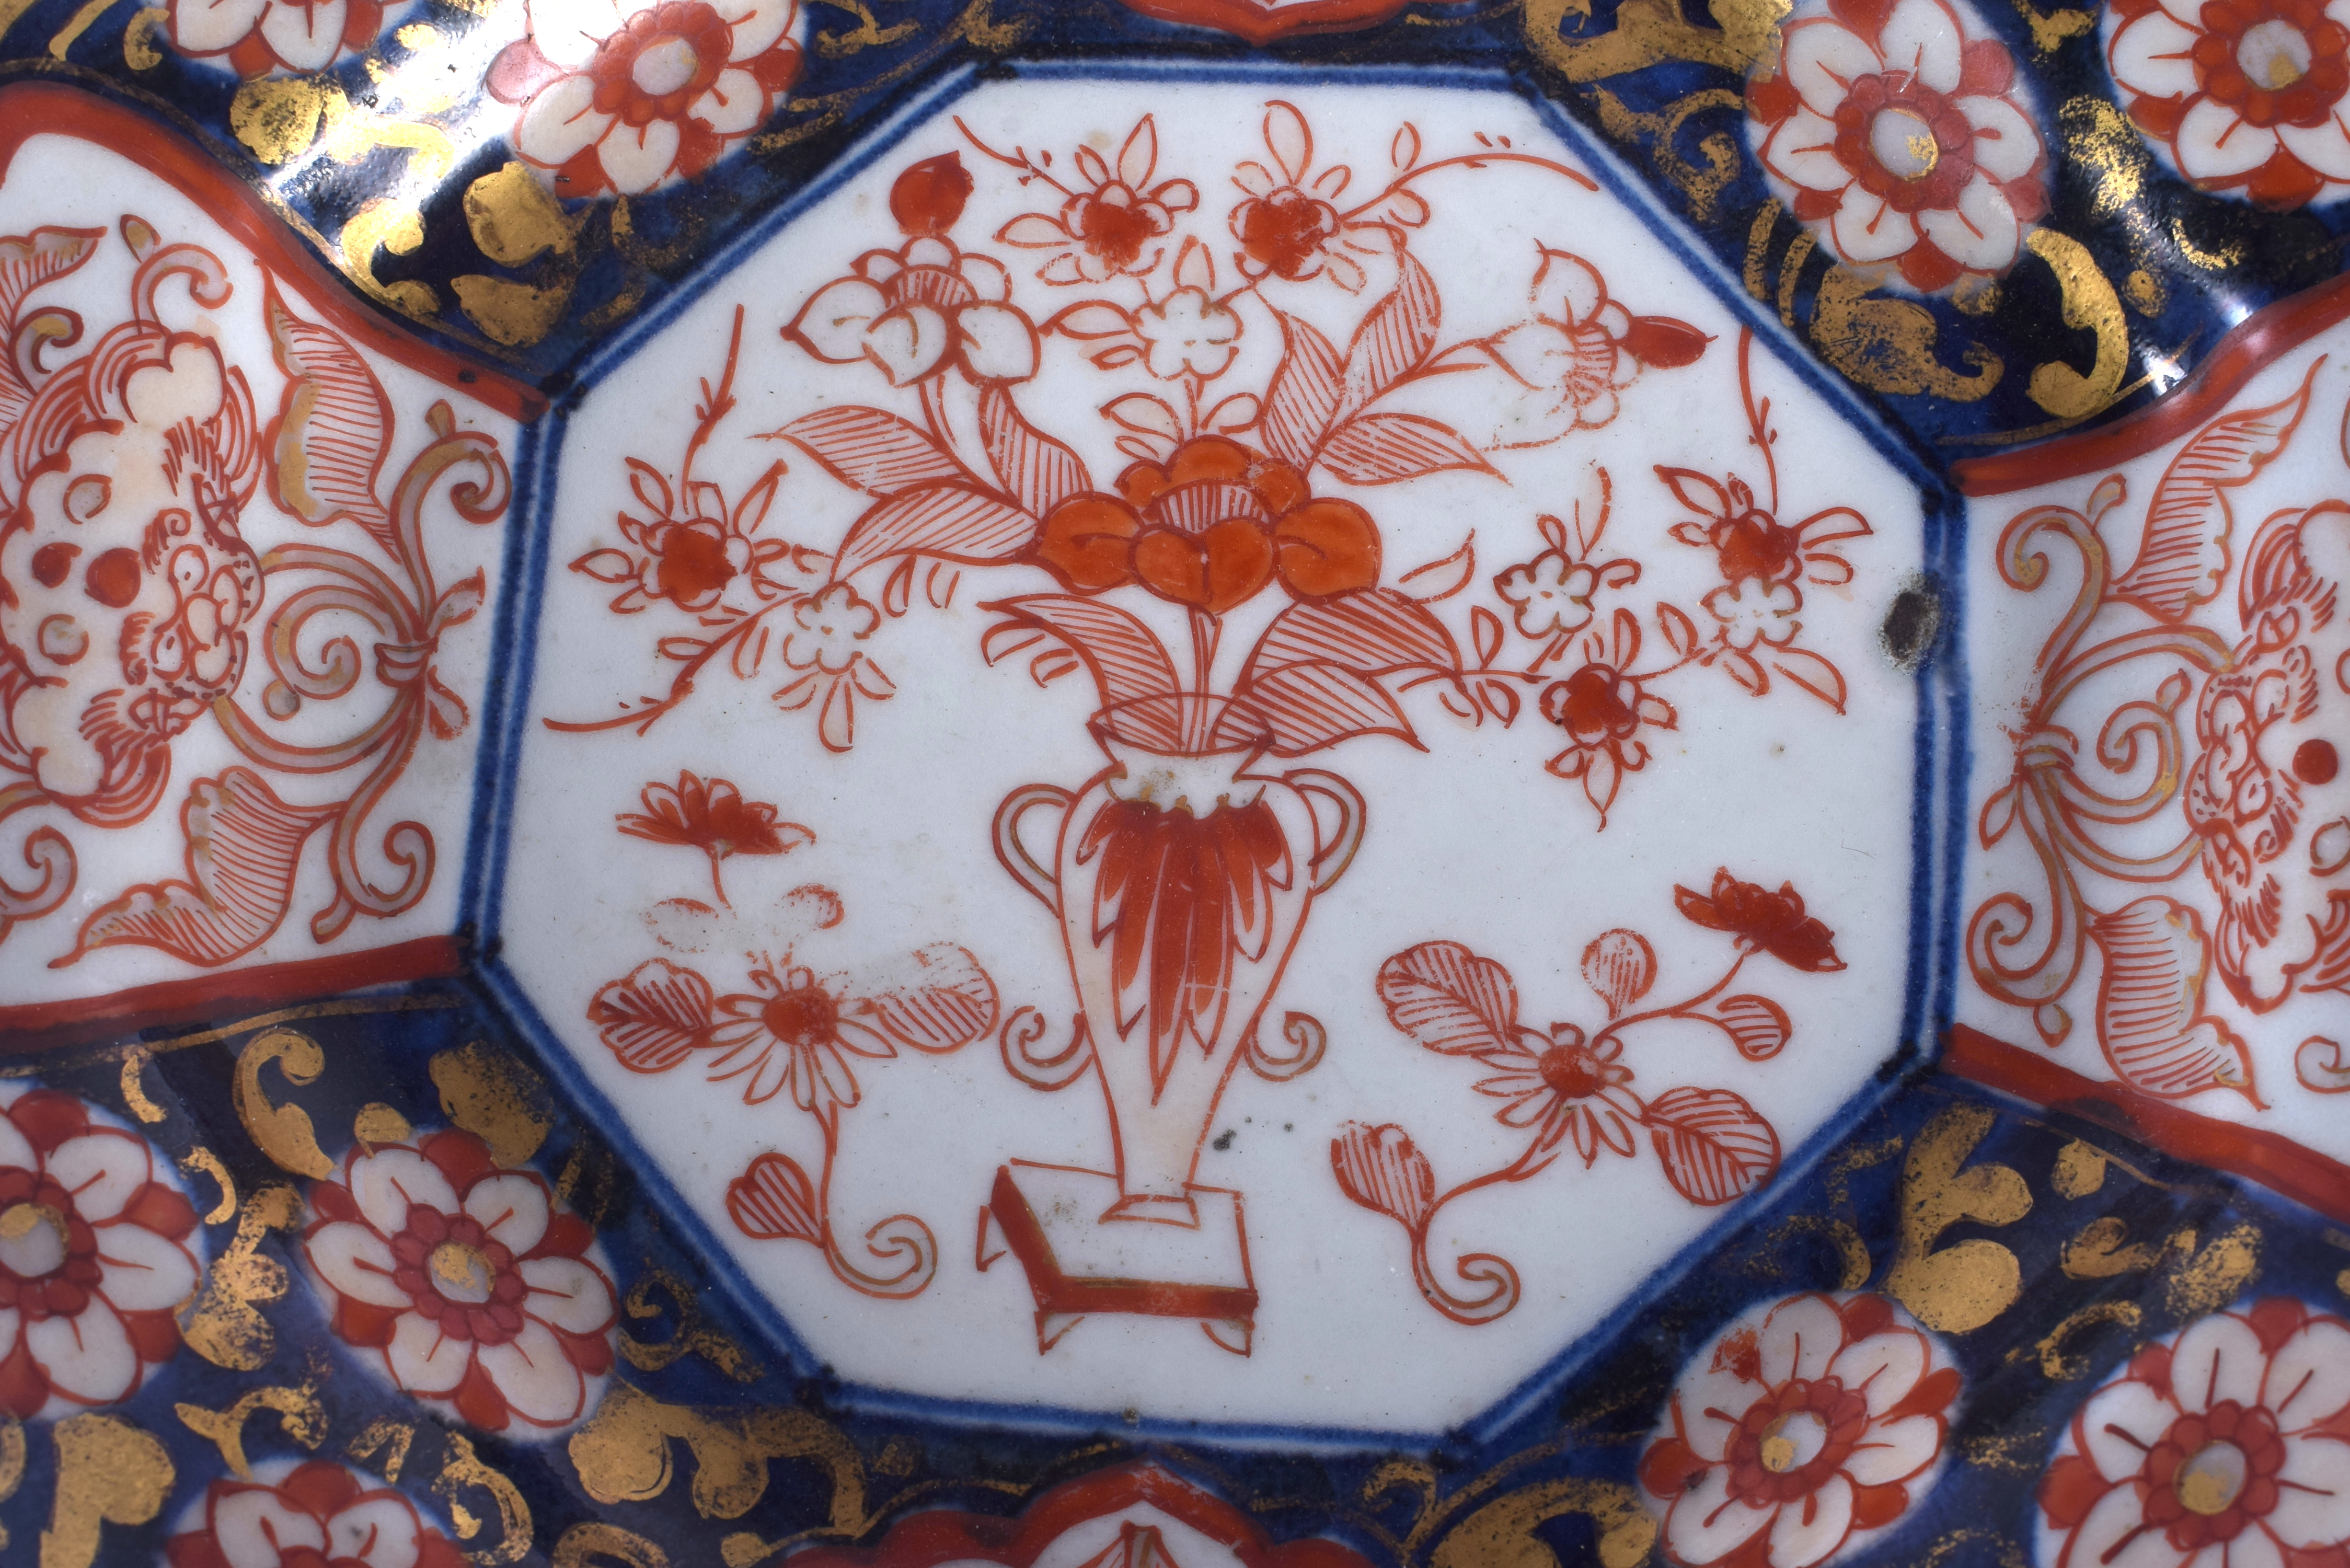 AN 18TH CENTURY JAPANESE EDO PERIOD IMARI OCTAGONAL PORCELAIN DISH painted with floral sprays. 21 cm - Image 4 of 5